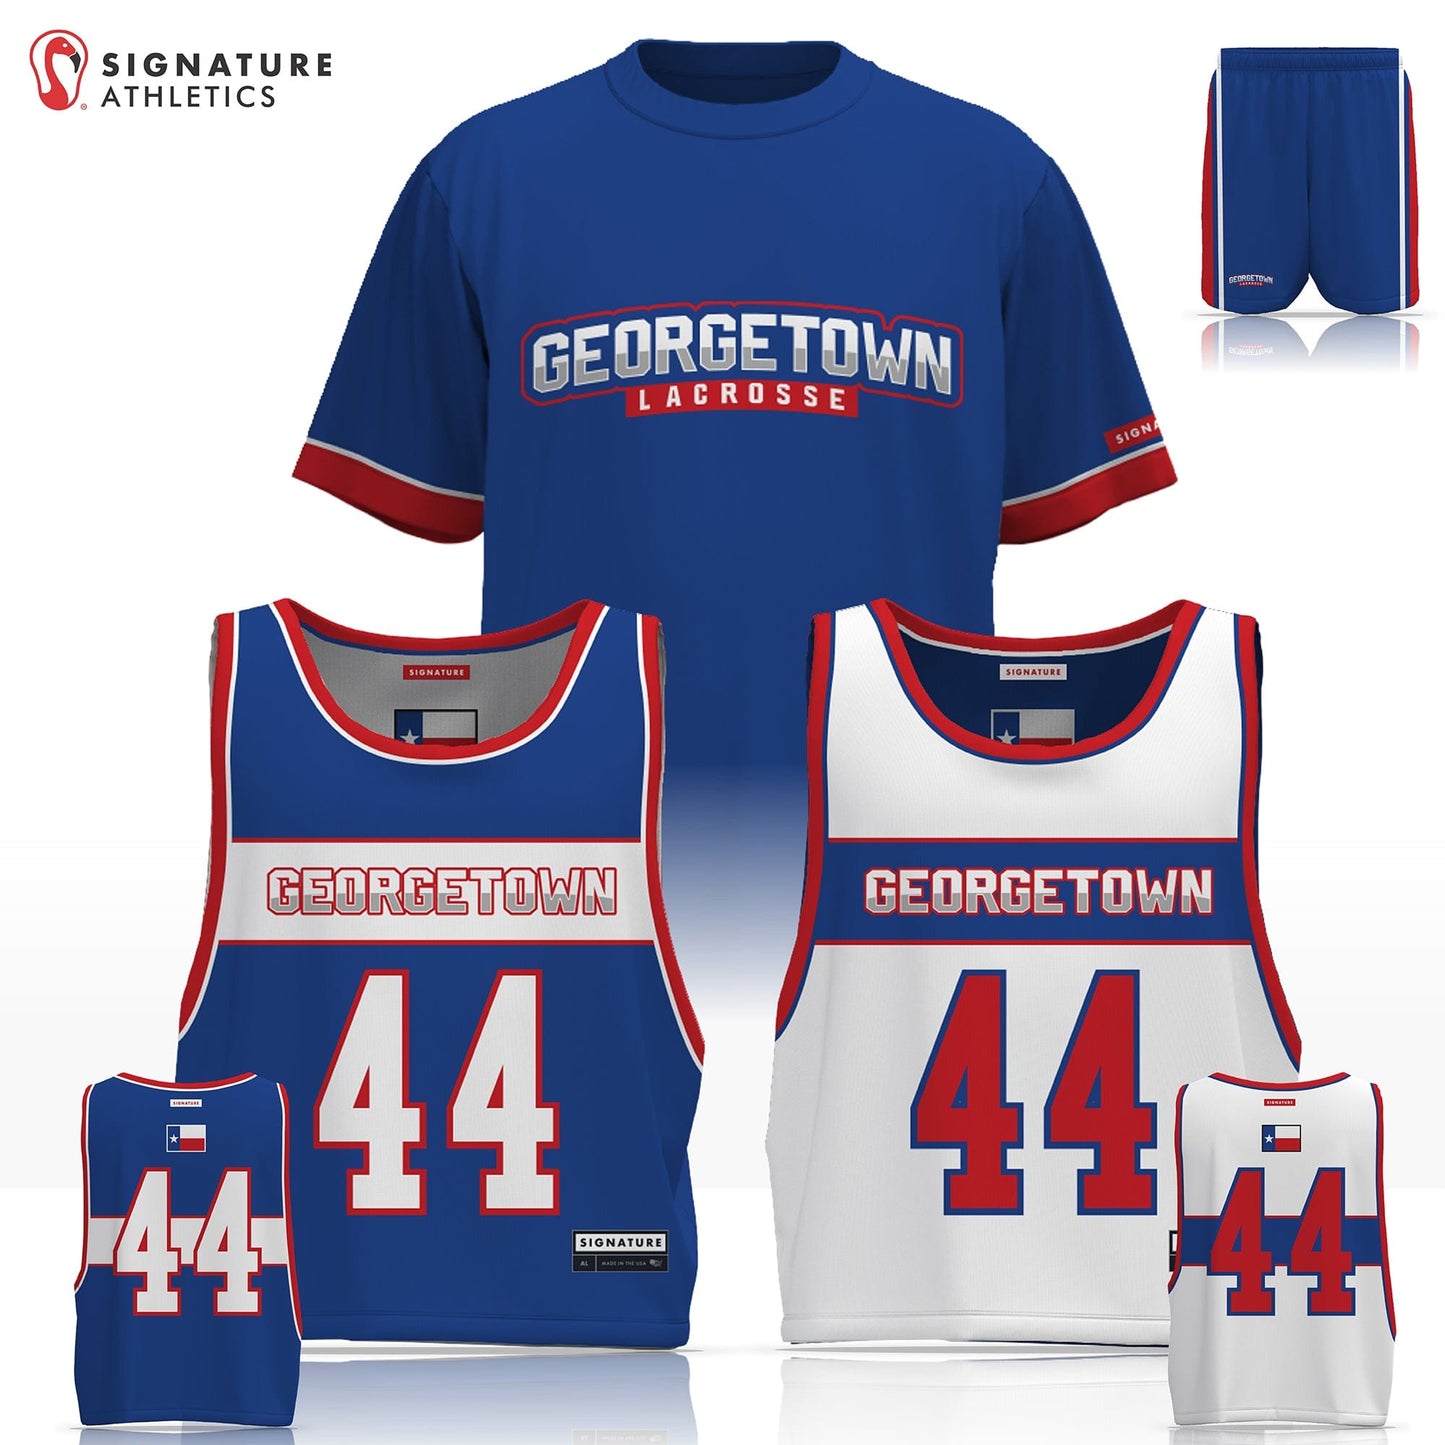 Georgetown Youth Lacrosse Men's 3 Piece Player Game Package: 7th/8th (Seniors) Signature Lacrosse